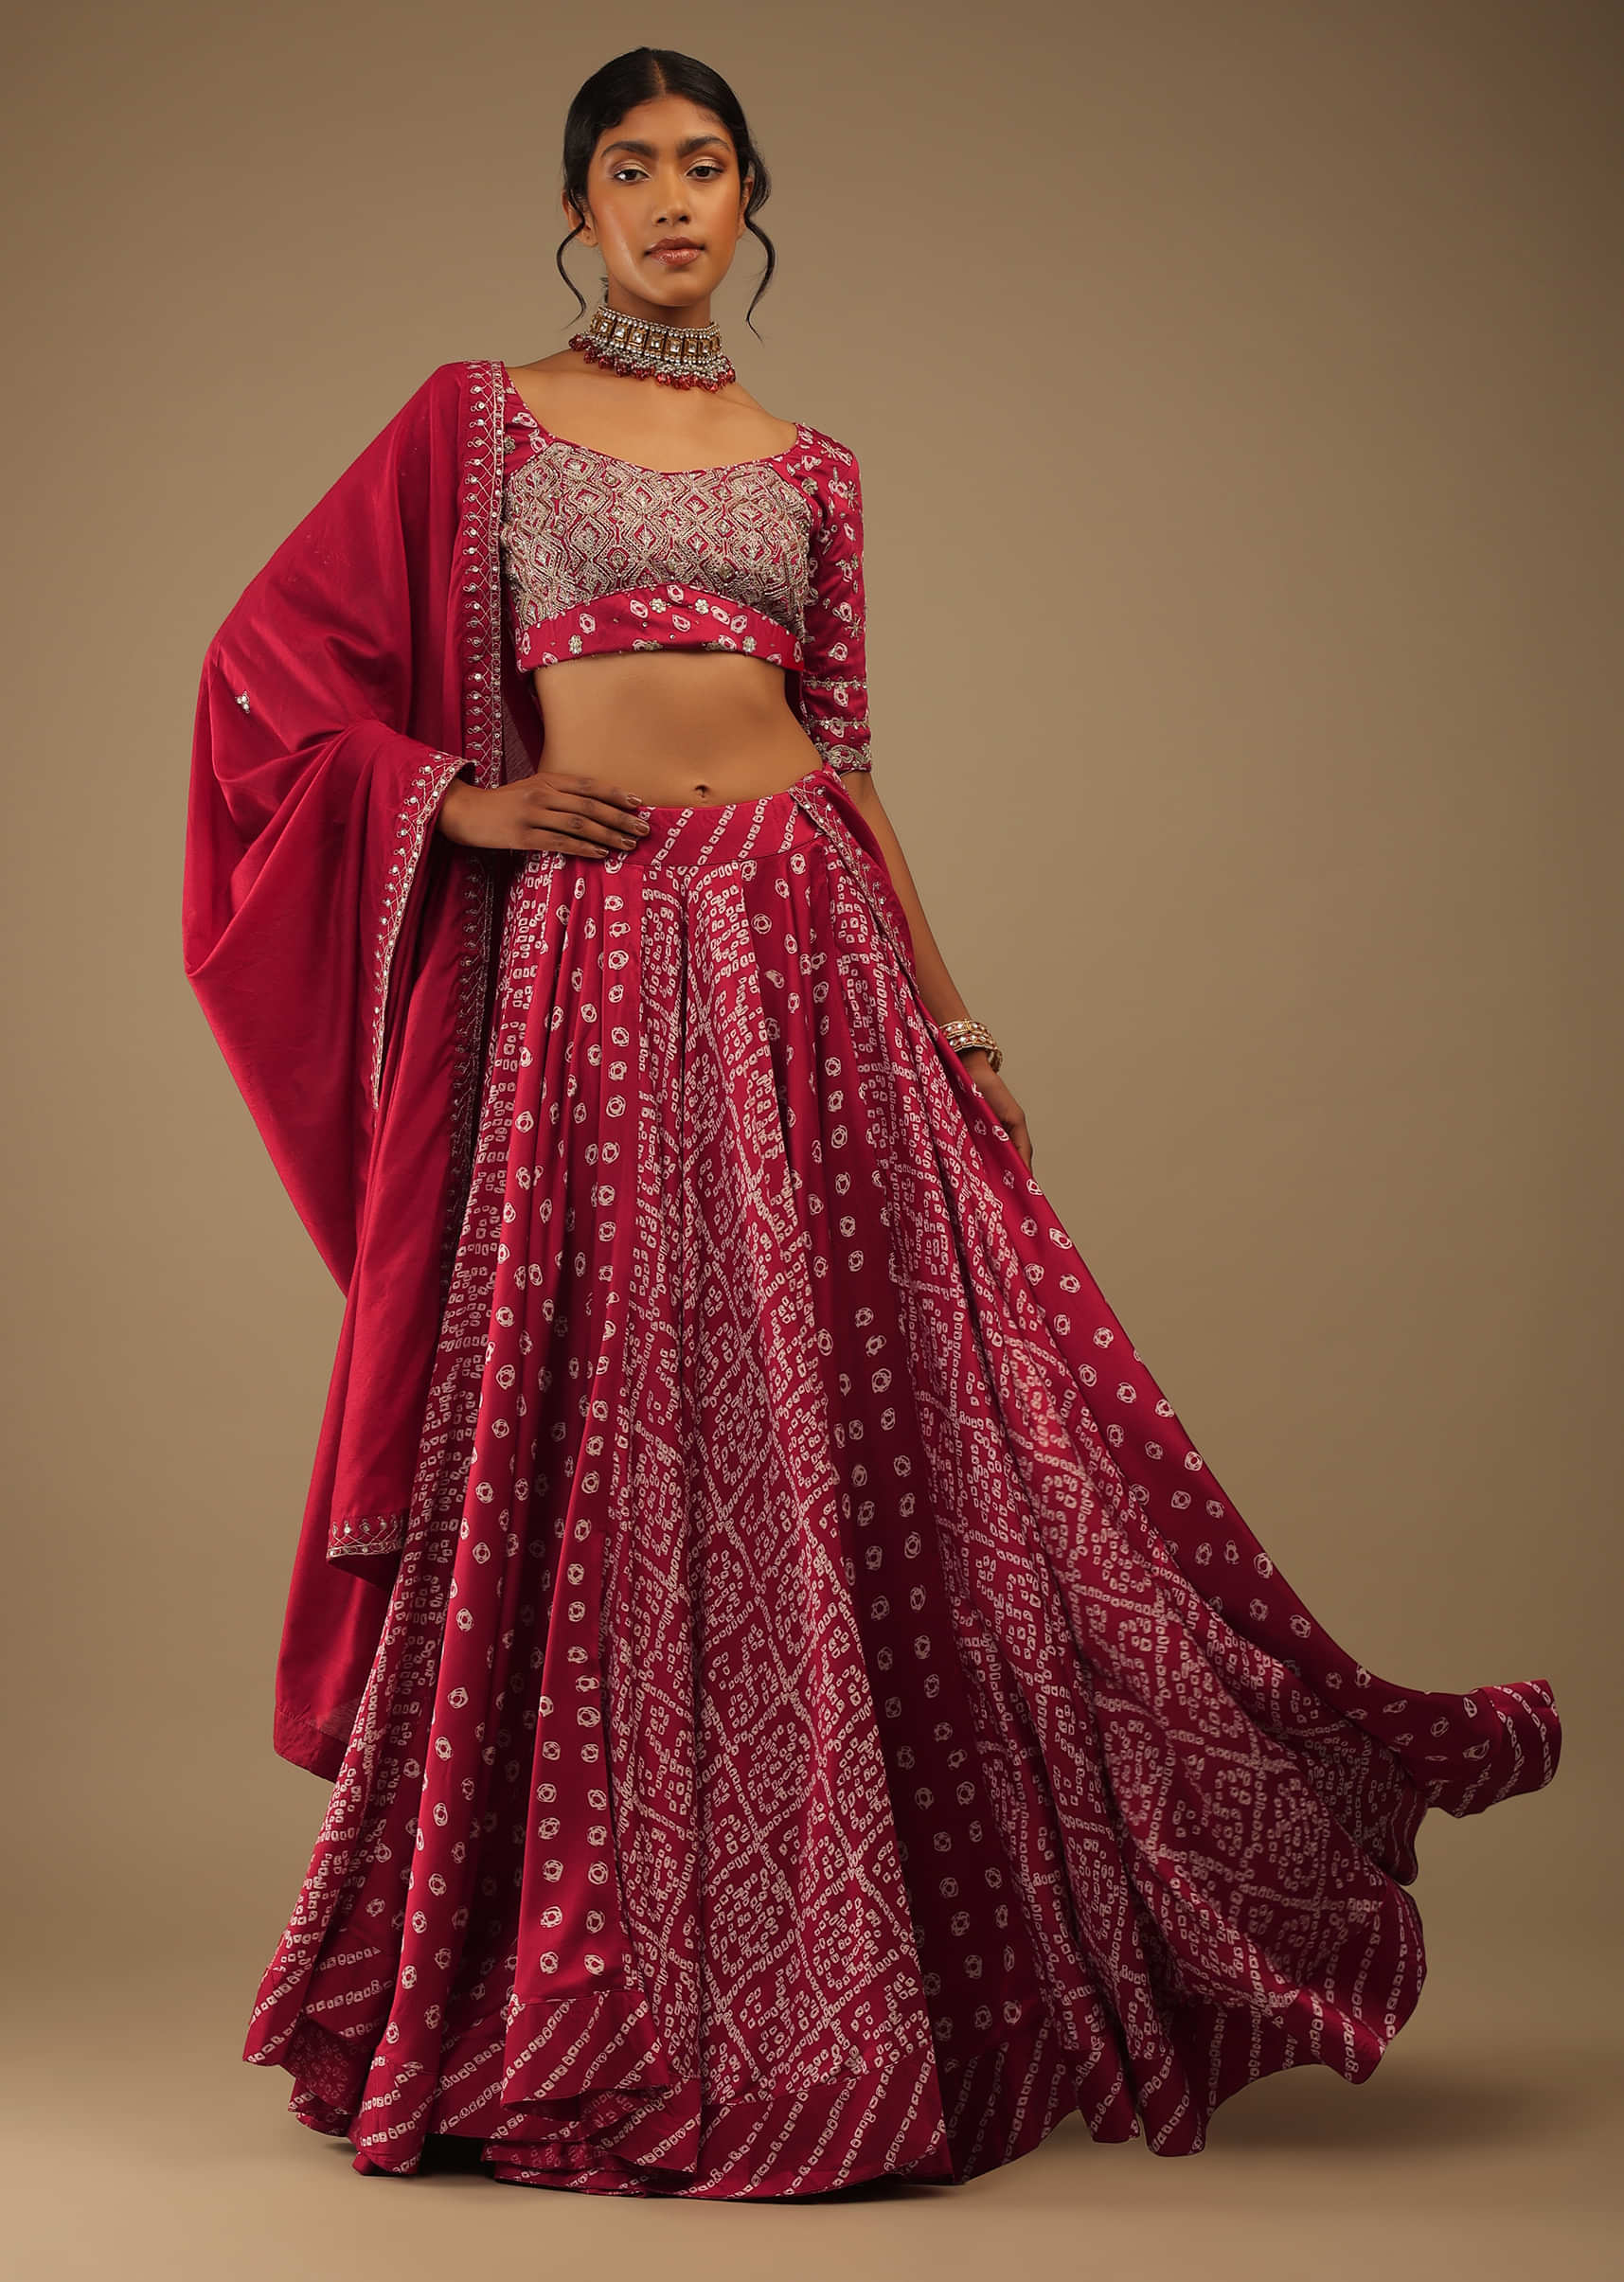 Crimson Red Lehenga And Choli Set In Digital Bandhani Print, Choli Comes In Moti And Sequins Embroidery Buttis